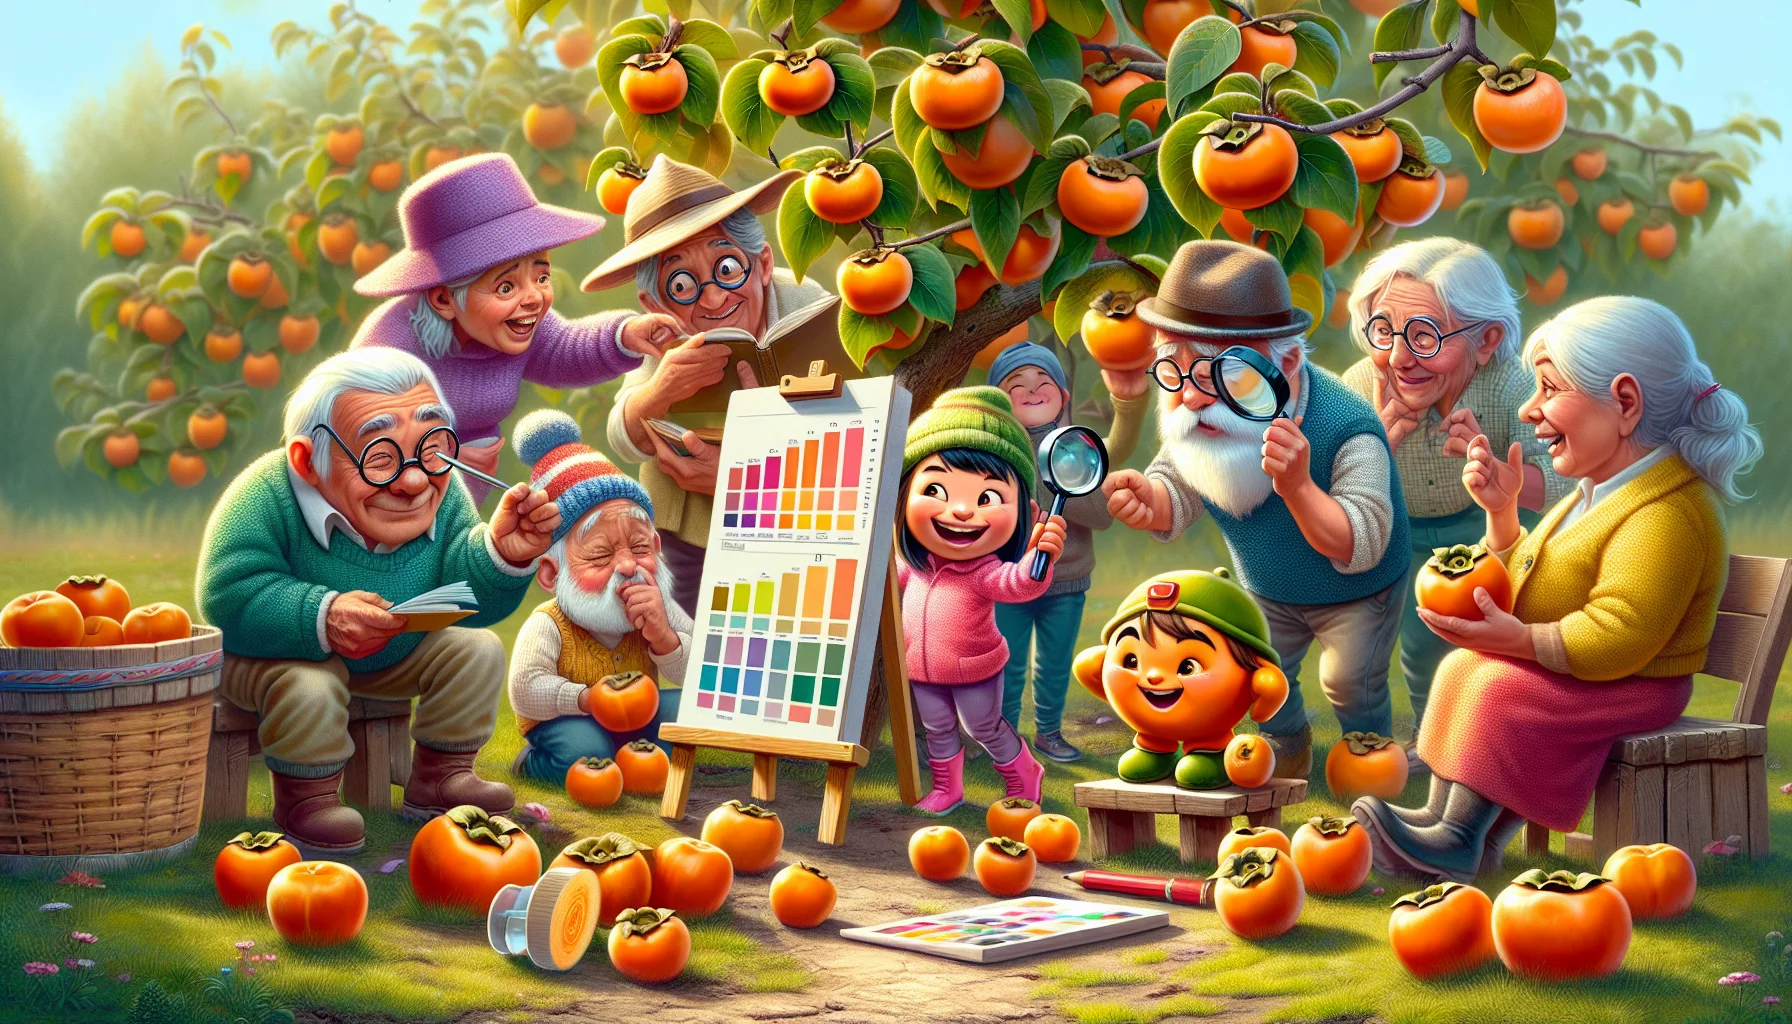 Create a detailed image of a funny and engaging scenario in the garden where different characters show how to determine if persimmons are ripe. They use unusual items, like a comedy-sized magnifying glass and a cute, well-behaved garden gnome holding a color chart for comparison. The gathered characters could be adults and children, an elderly Middle-Eastern man and a young Hispanic girl, all wearing cheerful gardening hats and gloves, in the midst of laughing while examining the tree filled with vibrant, orange persimmons. The image is meant to inspire joy in the prospect of gardening.